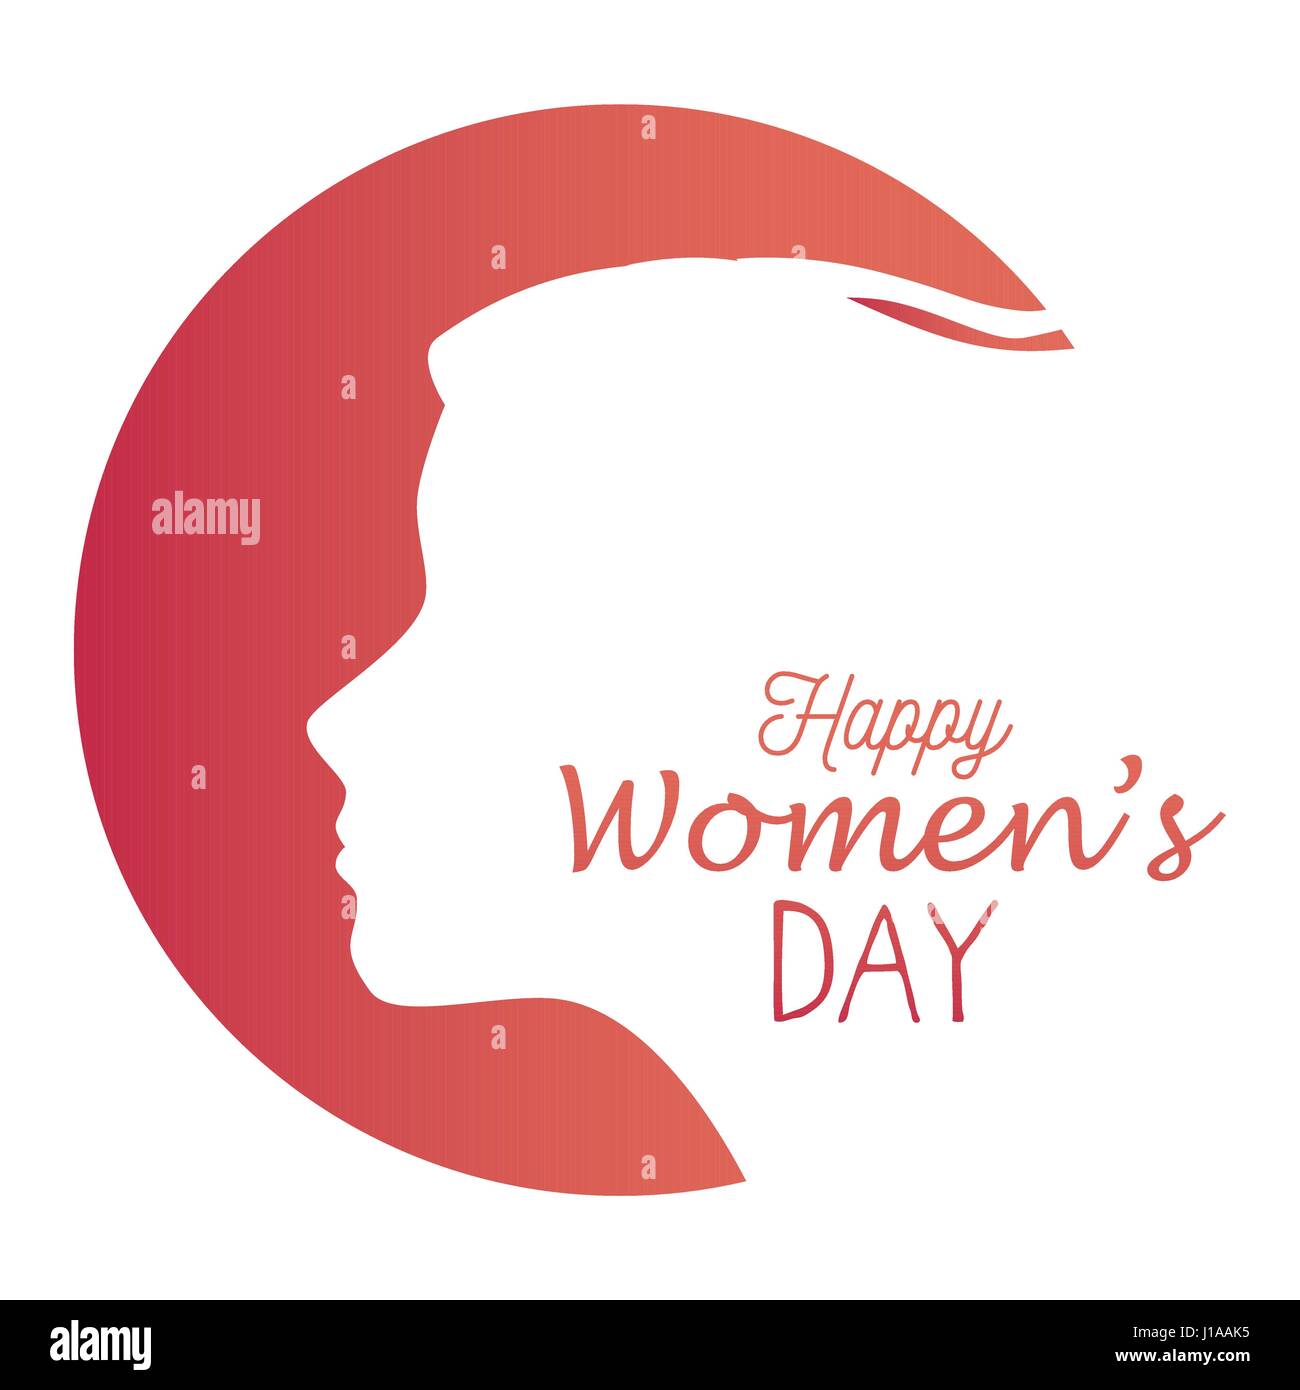 Women empowerment poster Cut Out Stock Images & Pictures - Alamy